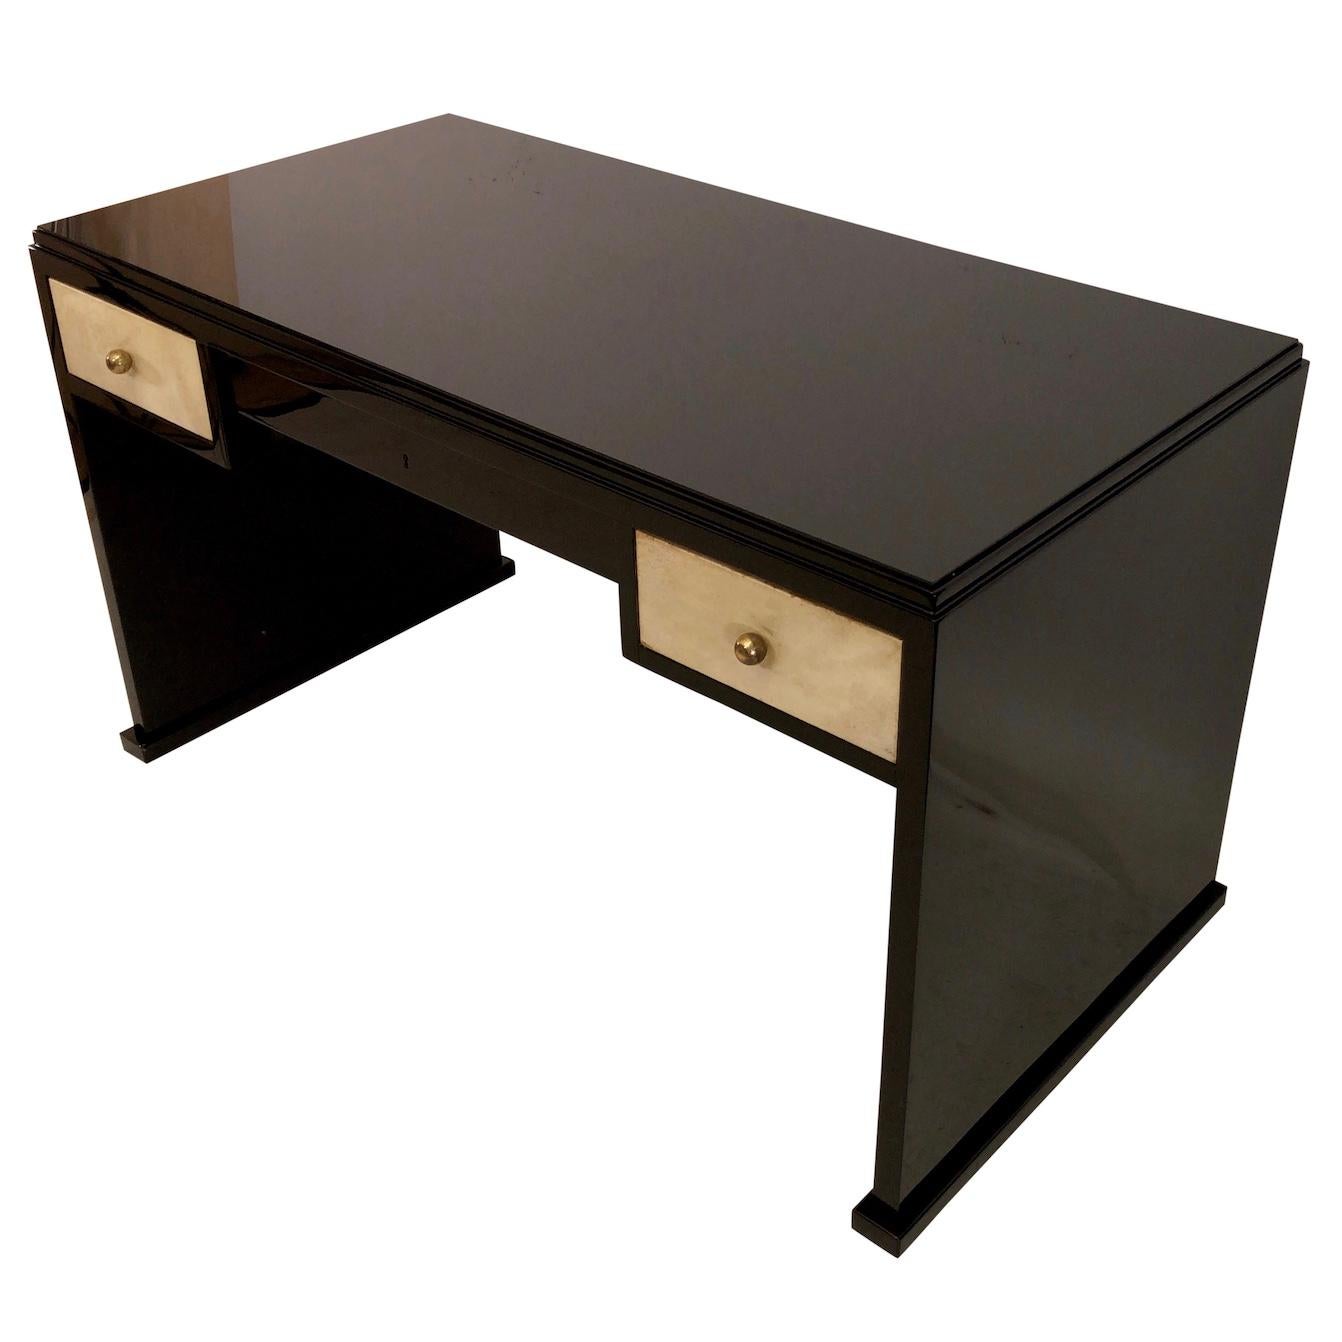 Blackened Modernist 1930s French Art Deco Office Desk Black Lacquer and Parchment Drawers